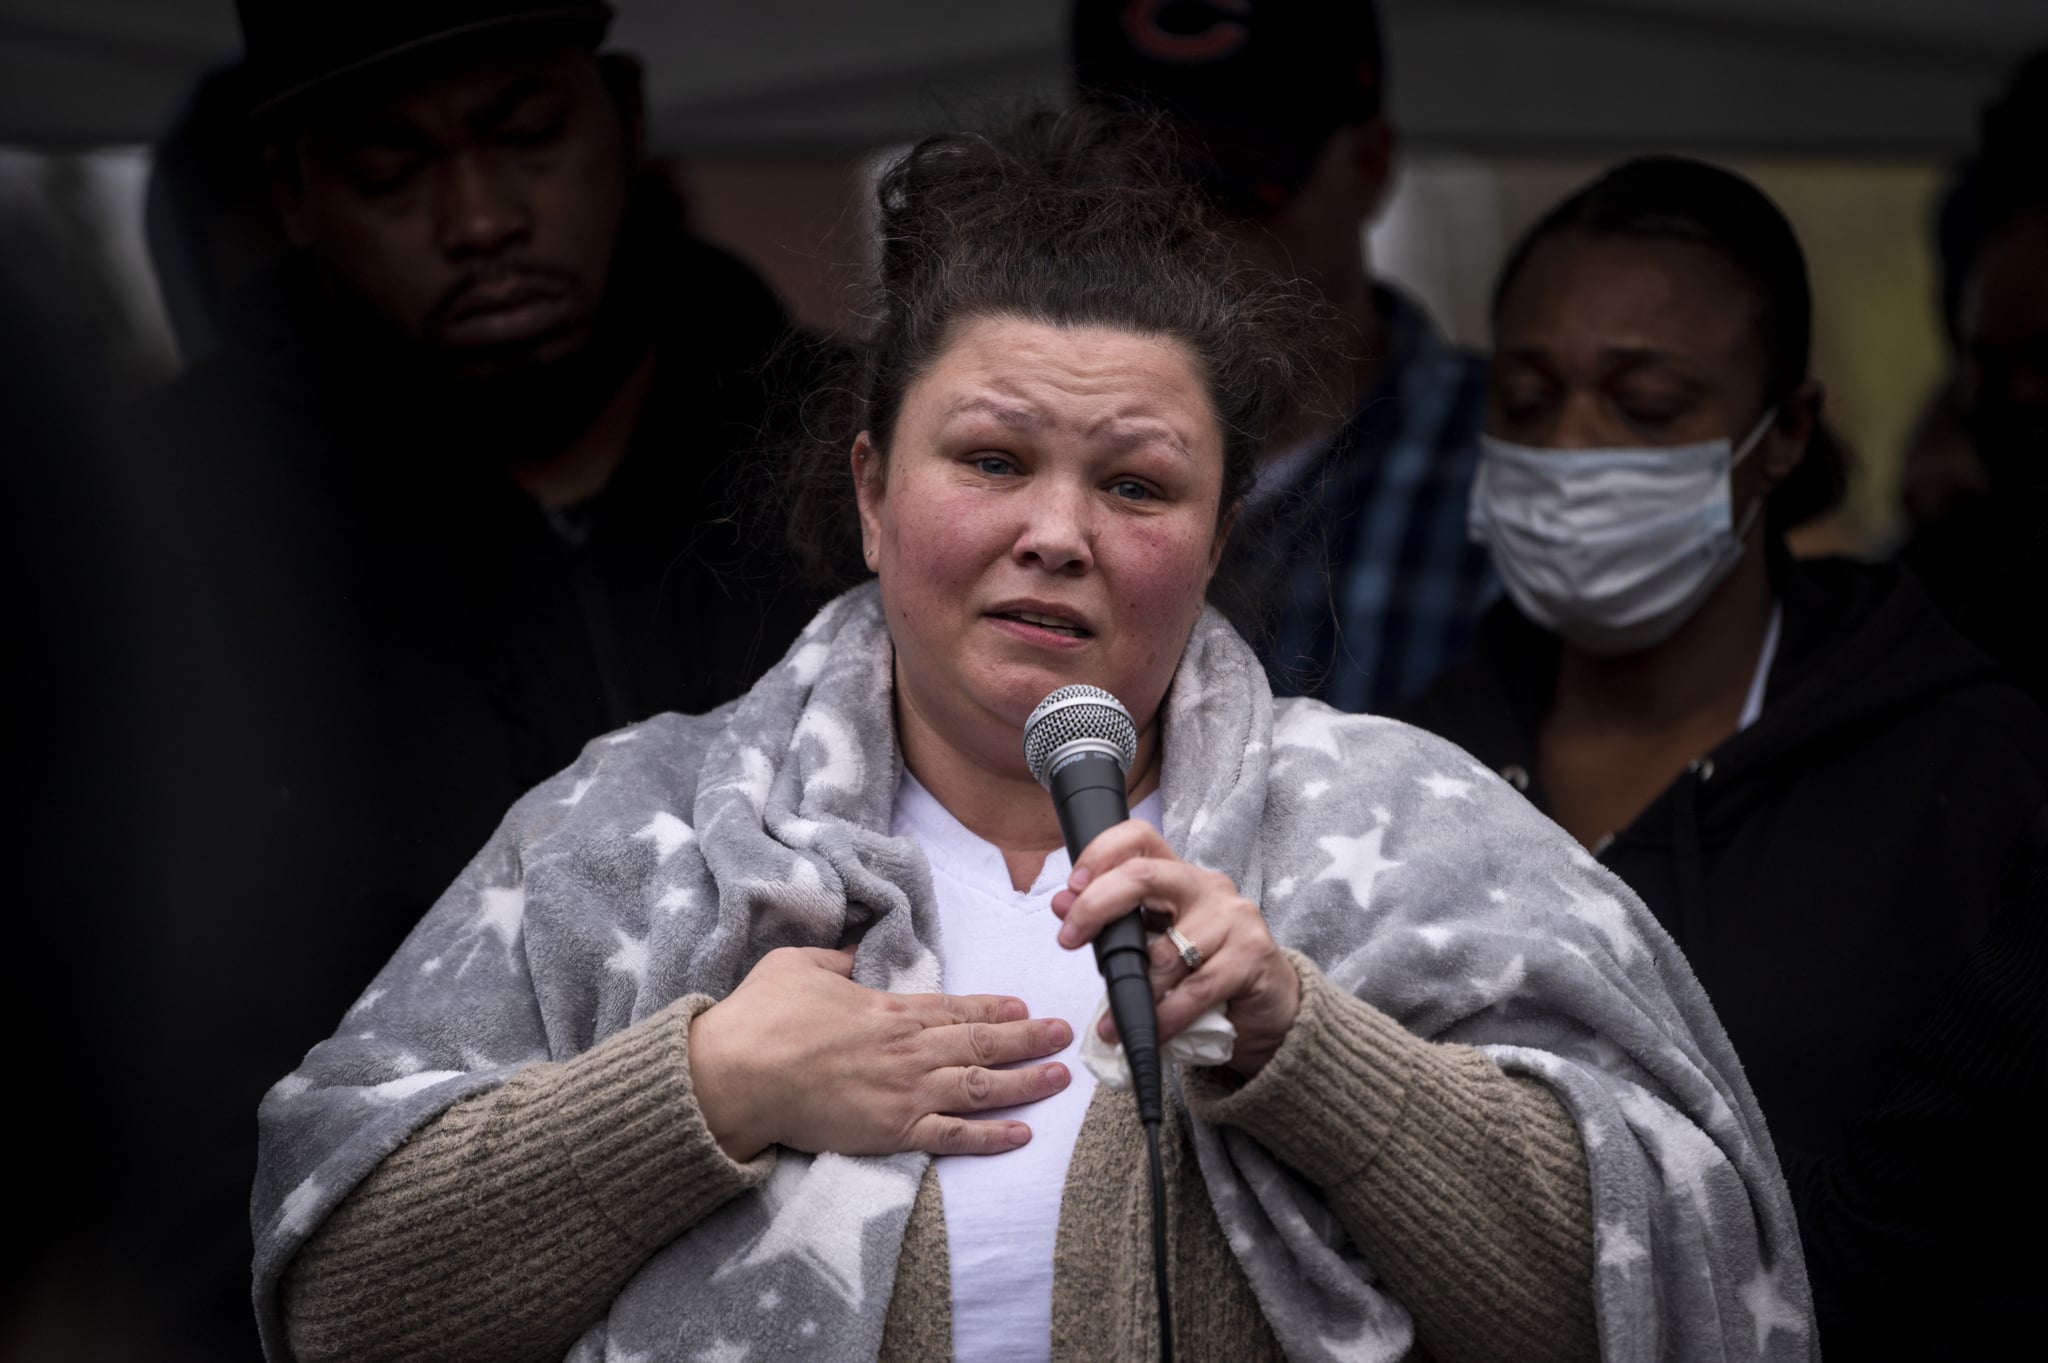 BROOKLYN CENTER, MN - APRIL 12: Katie Wright speaks during a vigil for her son Daunte Wright on April 12, 2021 in Brooklyn Center, Minnesota. Wright was shot and killed yesterday by Brooklyn Center police during a traffic stop. (Photo by Stephen Maturen/Getty Images)